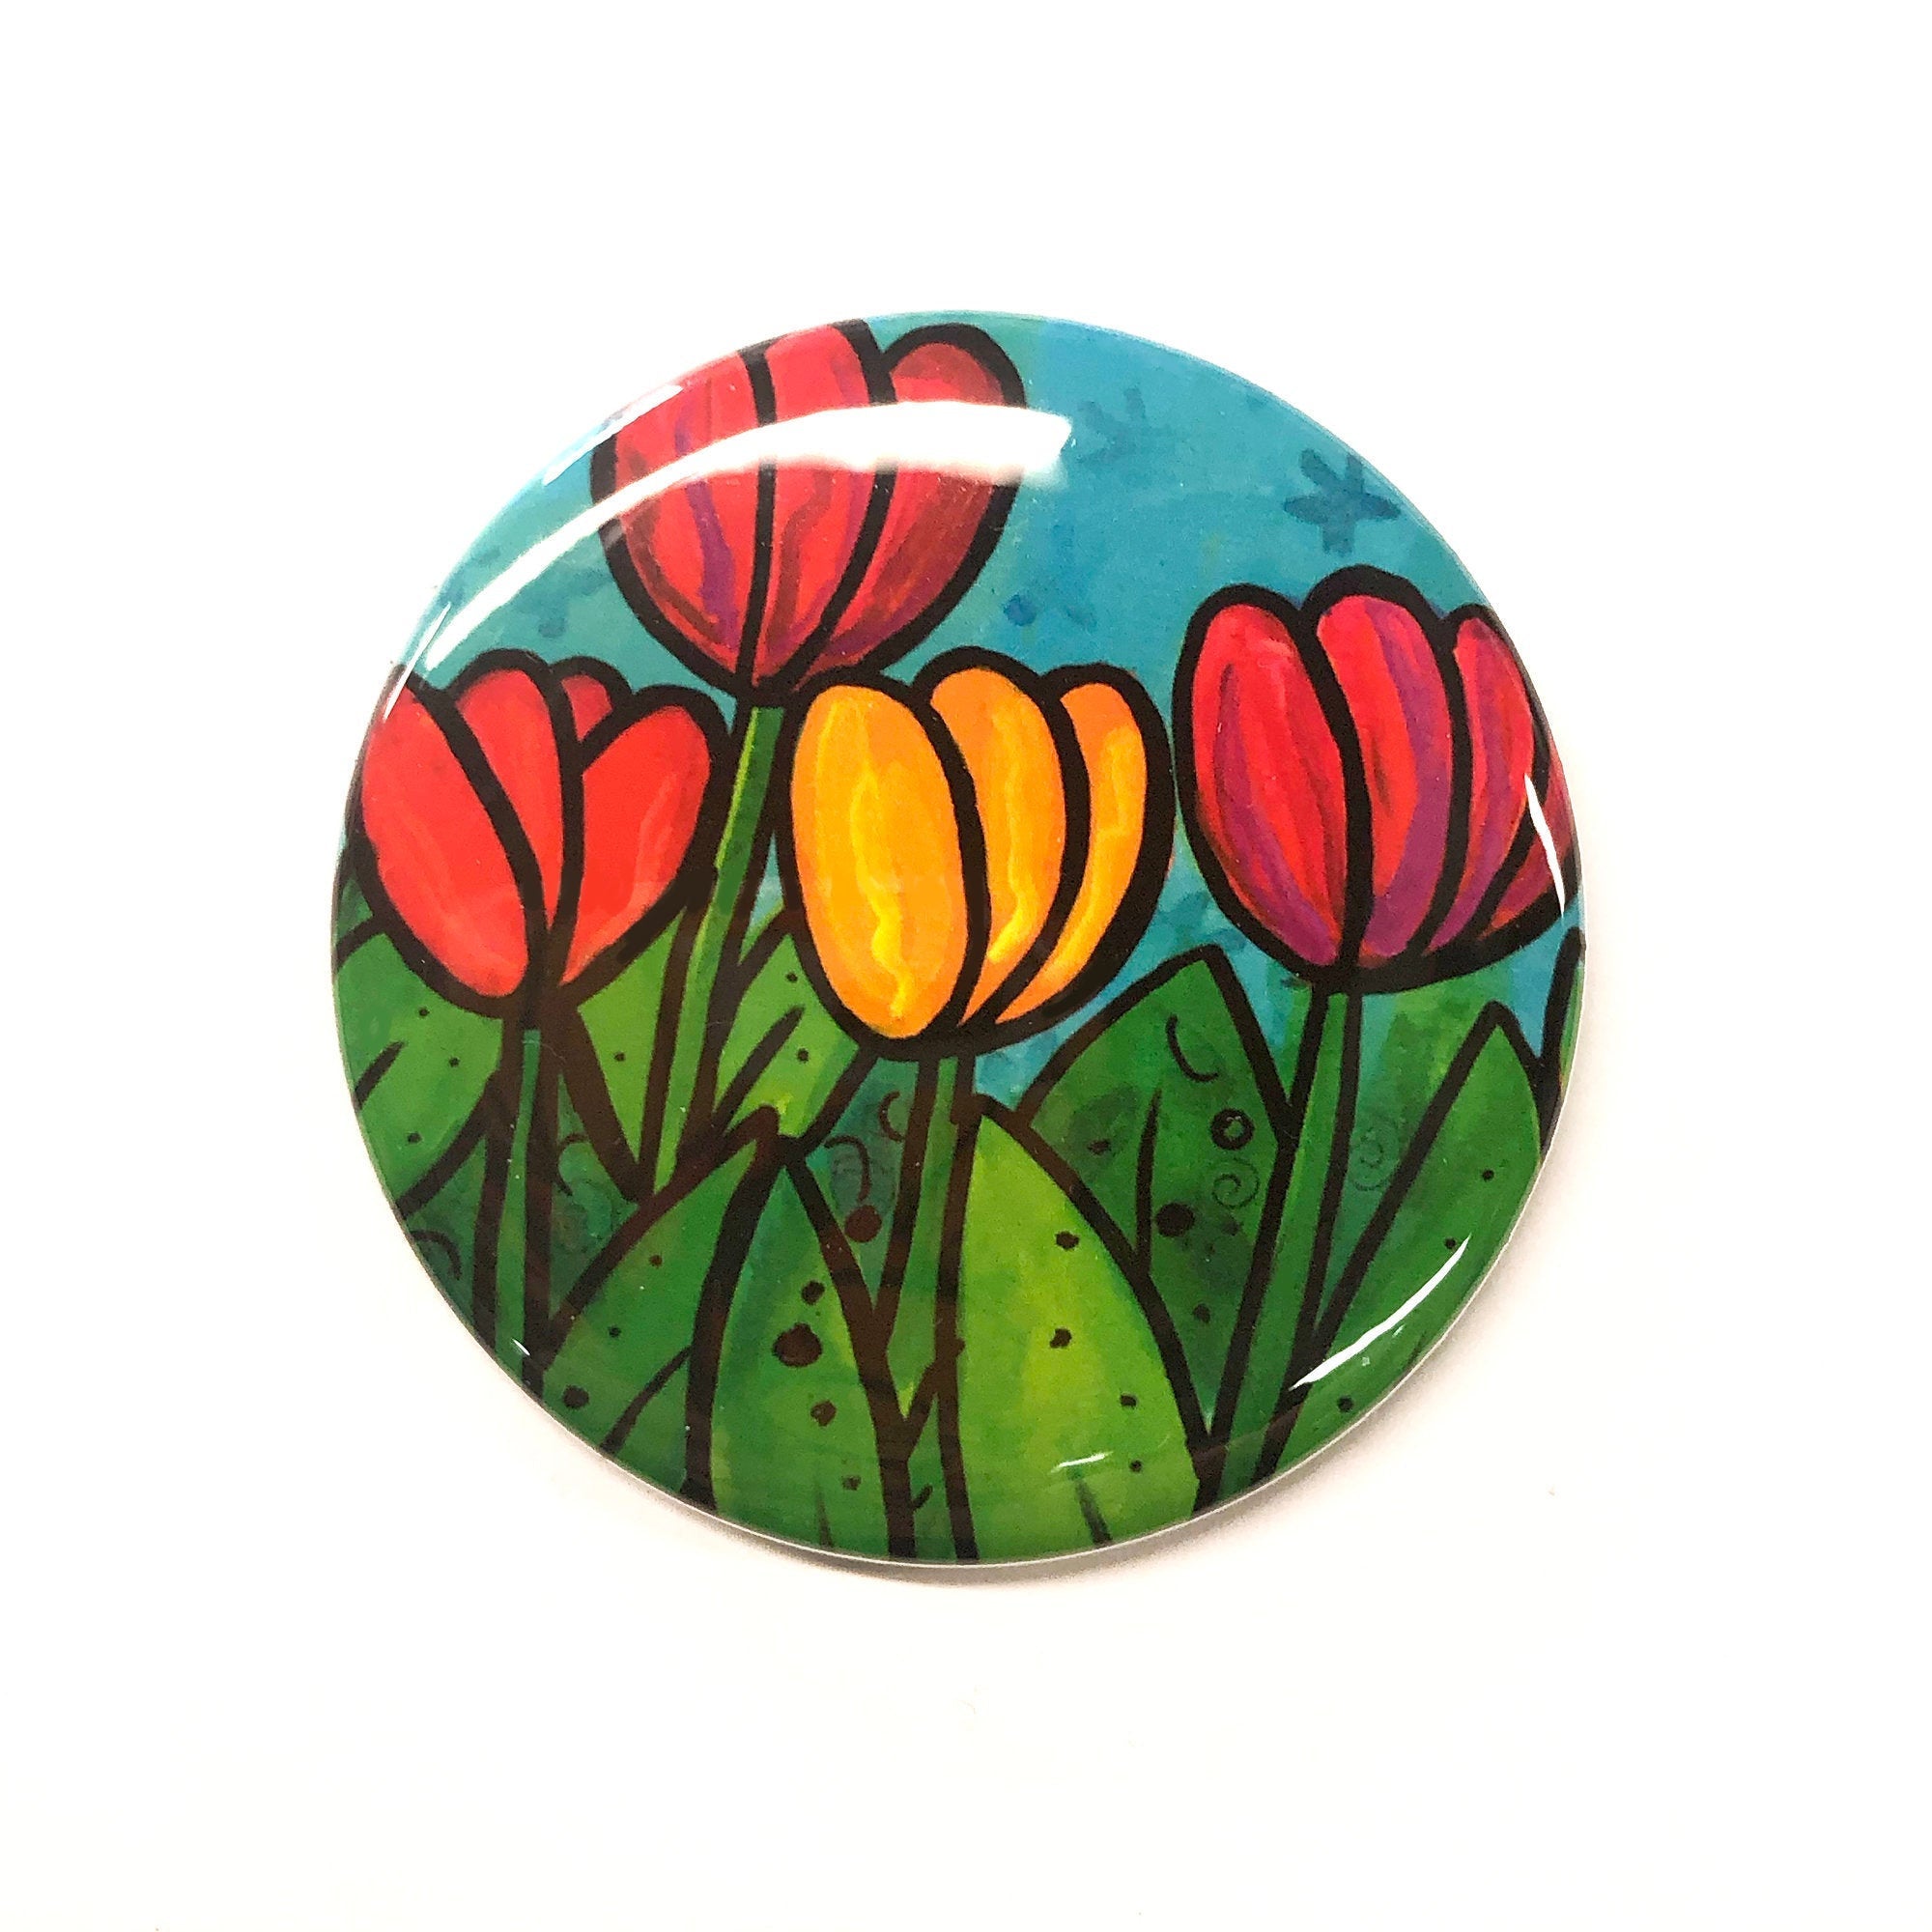 Happy Tulip Magnet, Pin Back Button, or Pocket Mirror  - Whimsical Flower Magnet for Fridge, Locker, or Board - Pinback or Purse Mirror